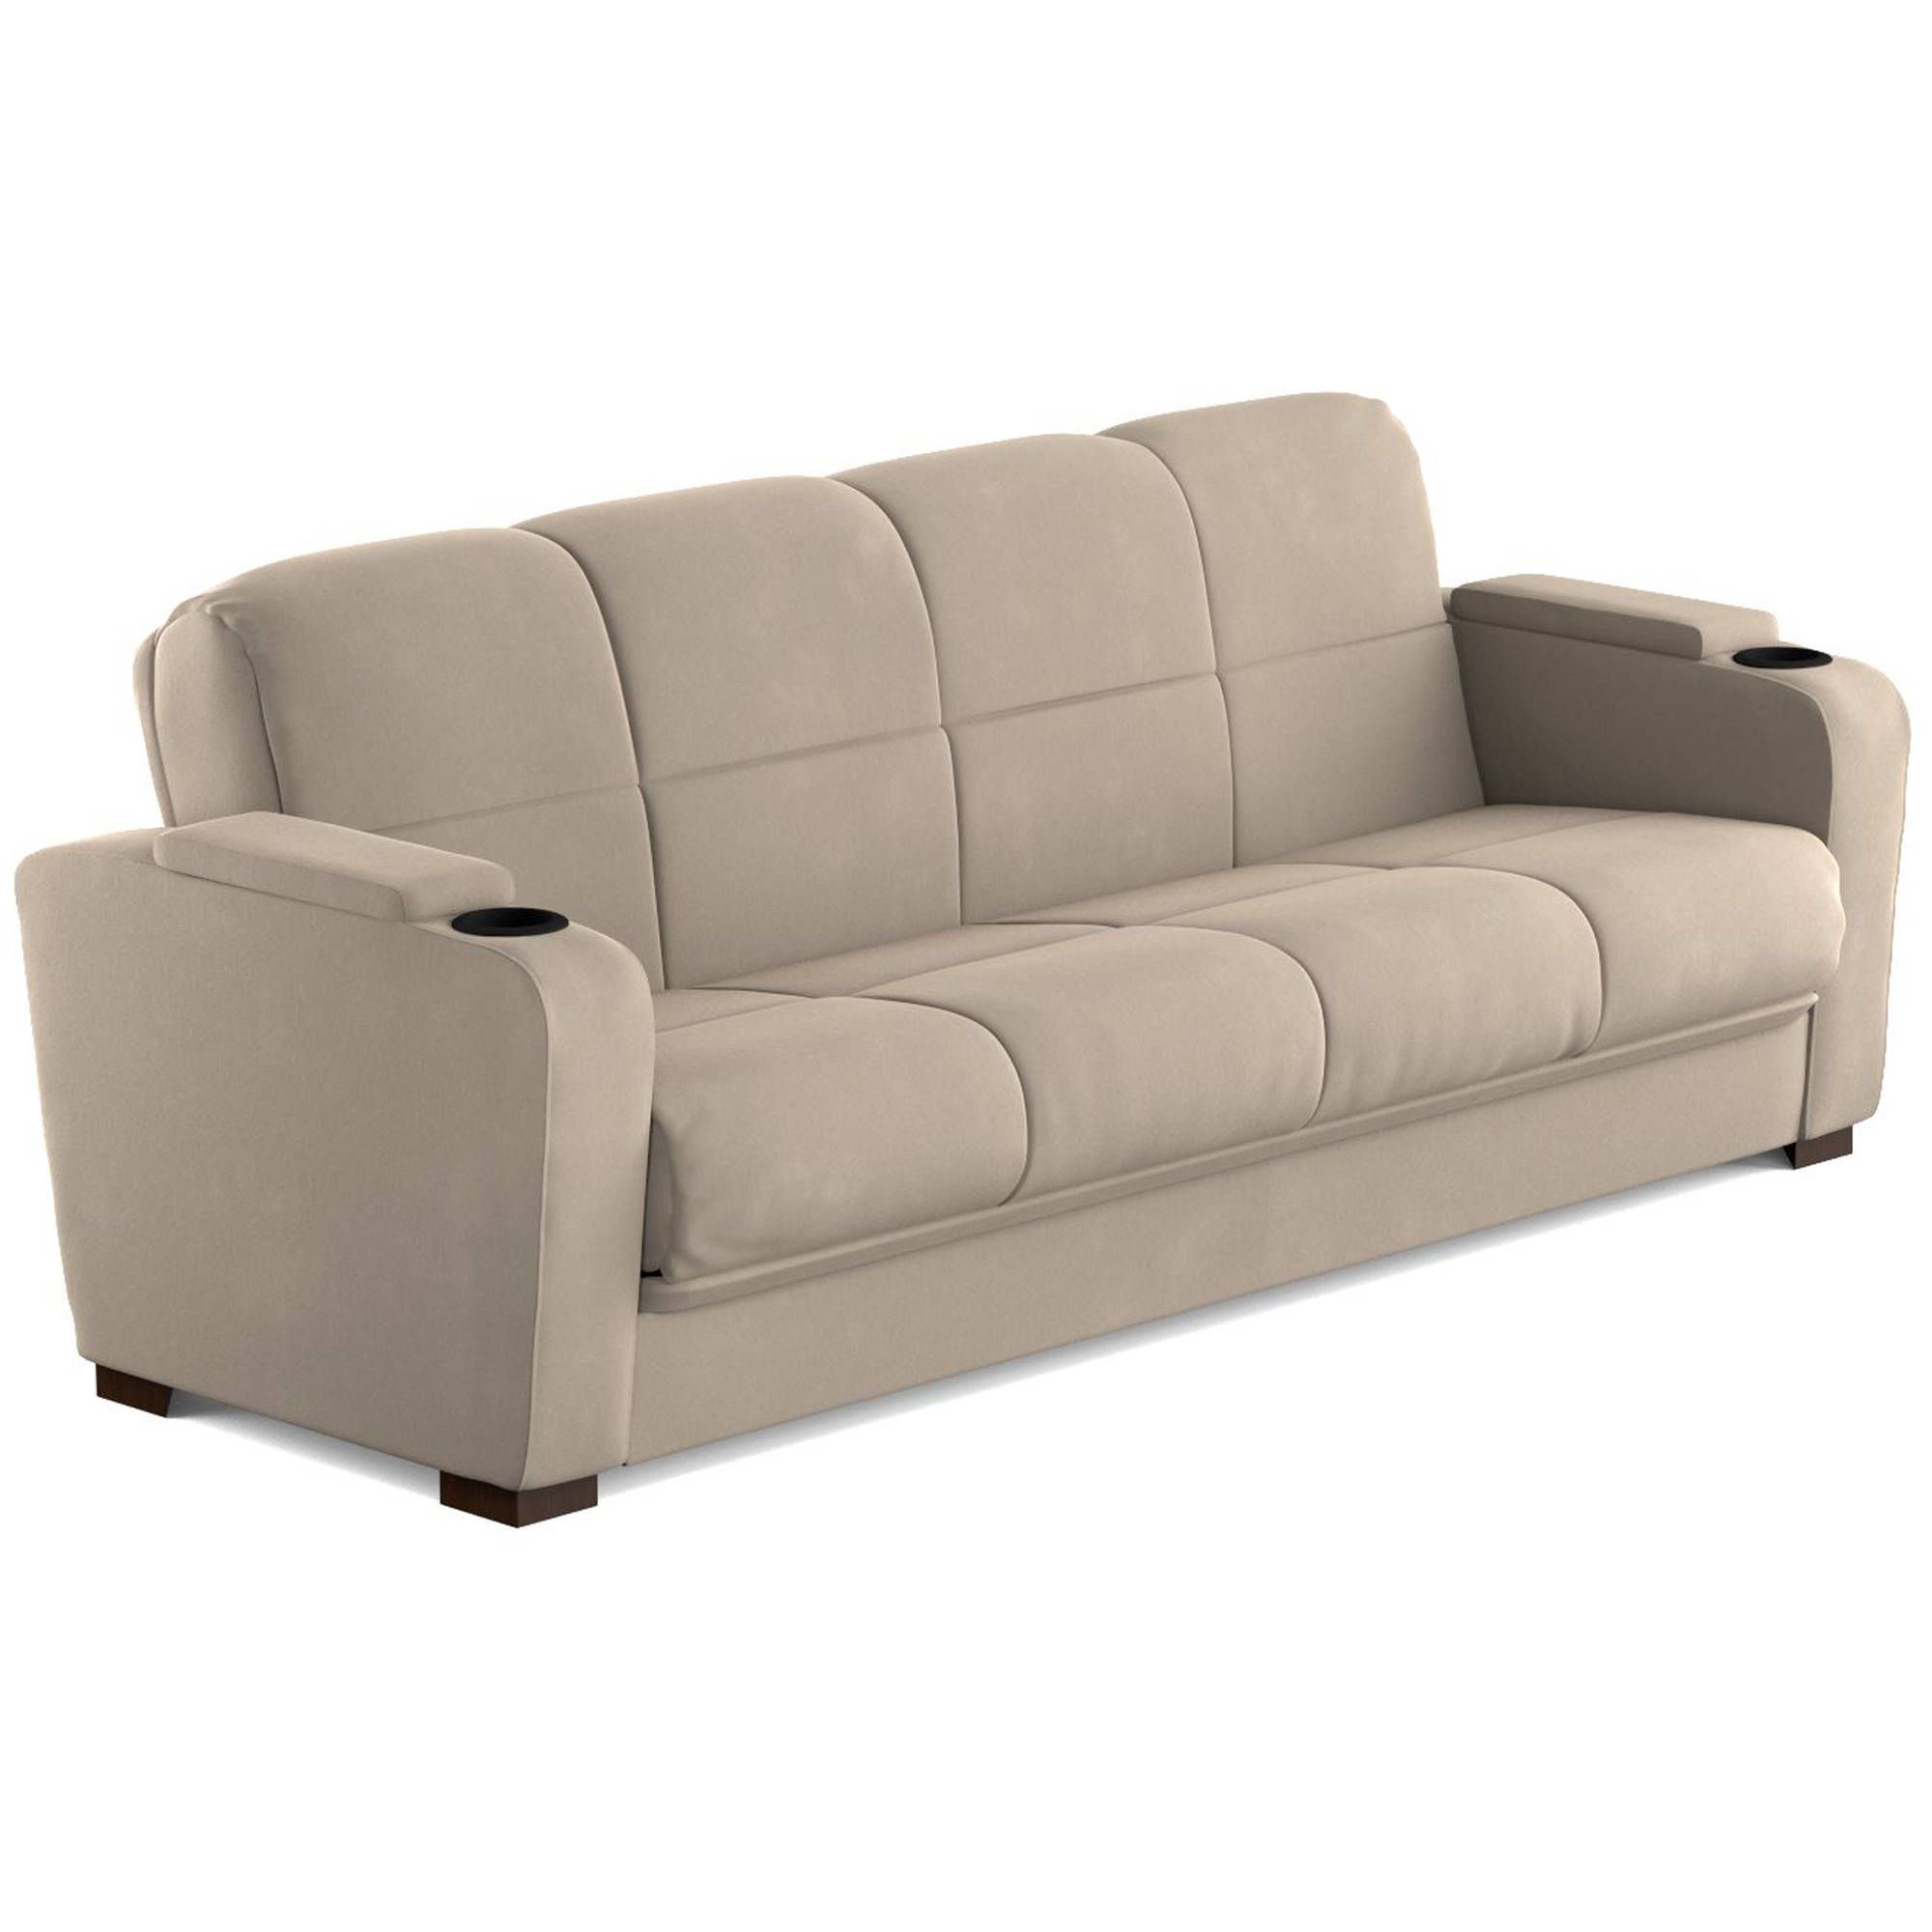 Mainstays Tyler Futon With Storage Sofa Sleeper Bed Inside Celine Sectional Futon Sofas With Storage Reclining Couch (View 5 of 15)